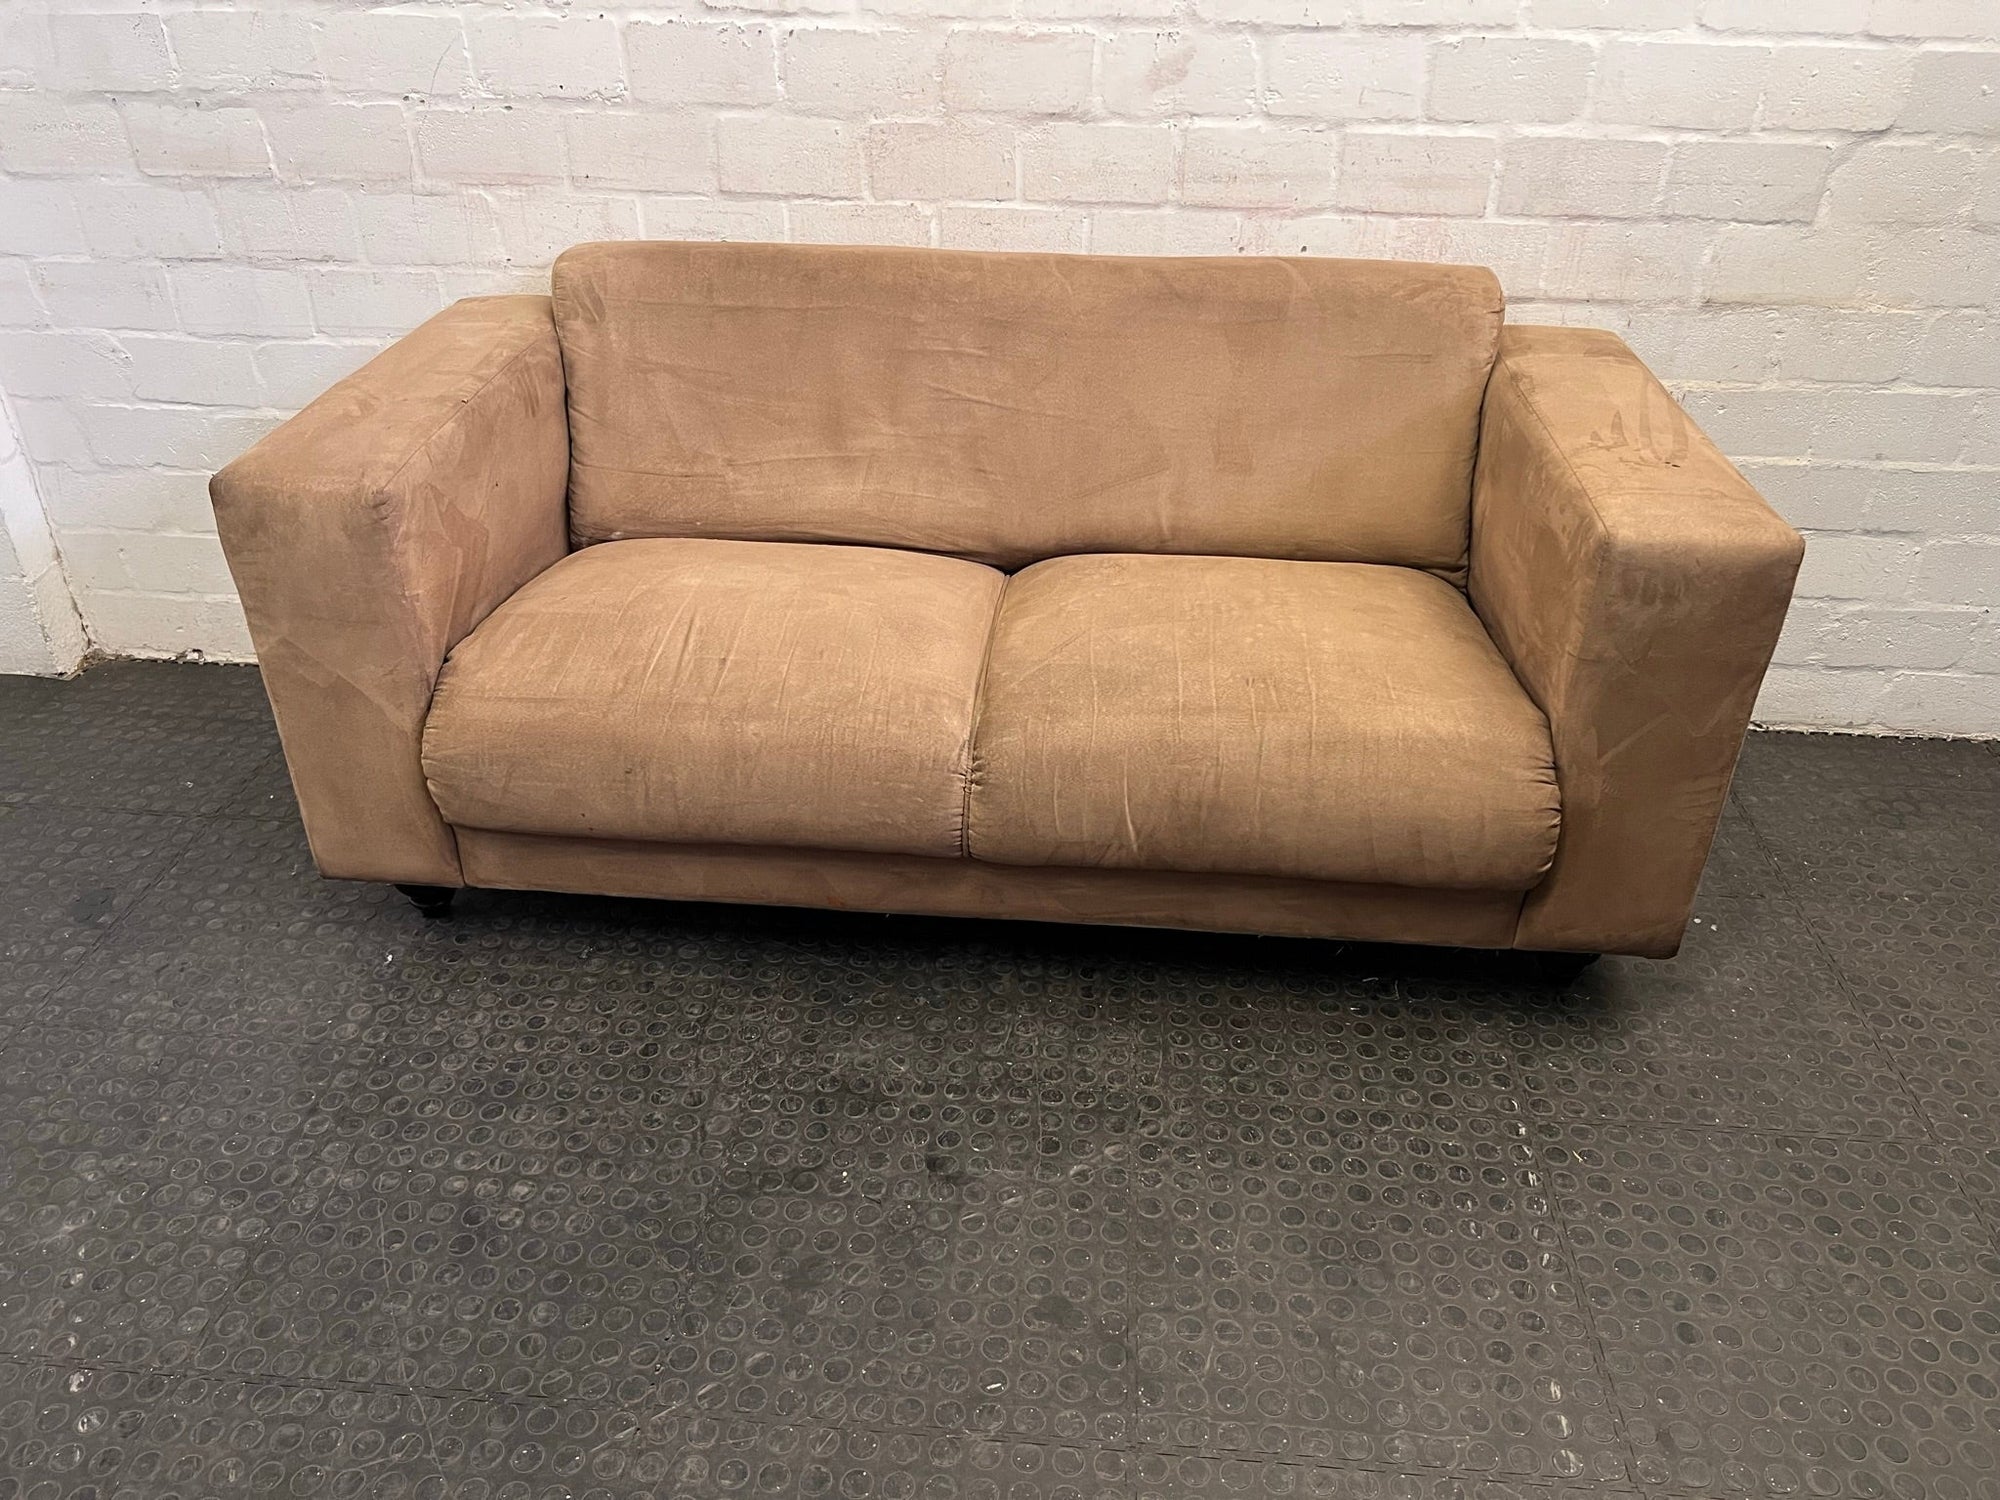 Beige Suede Two Seater Couch - REDUCED